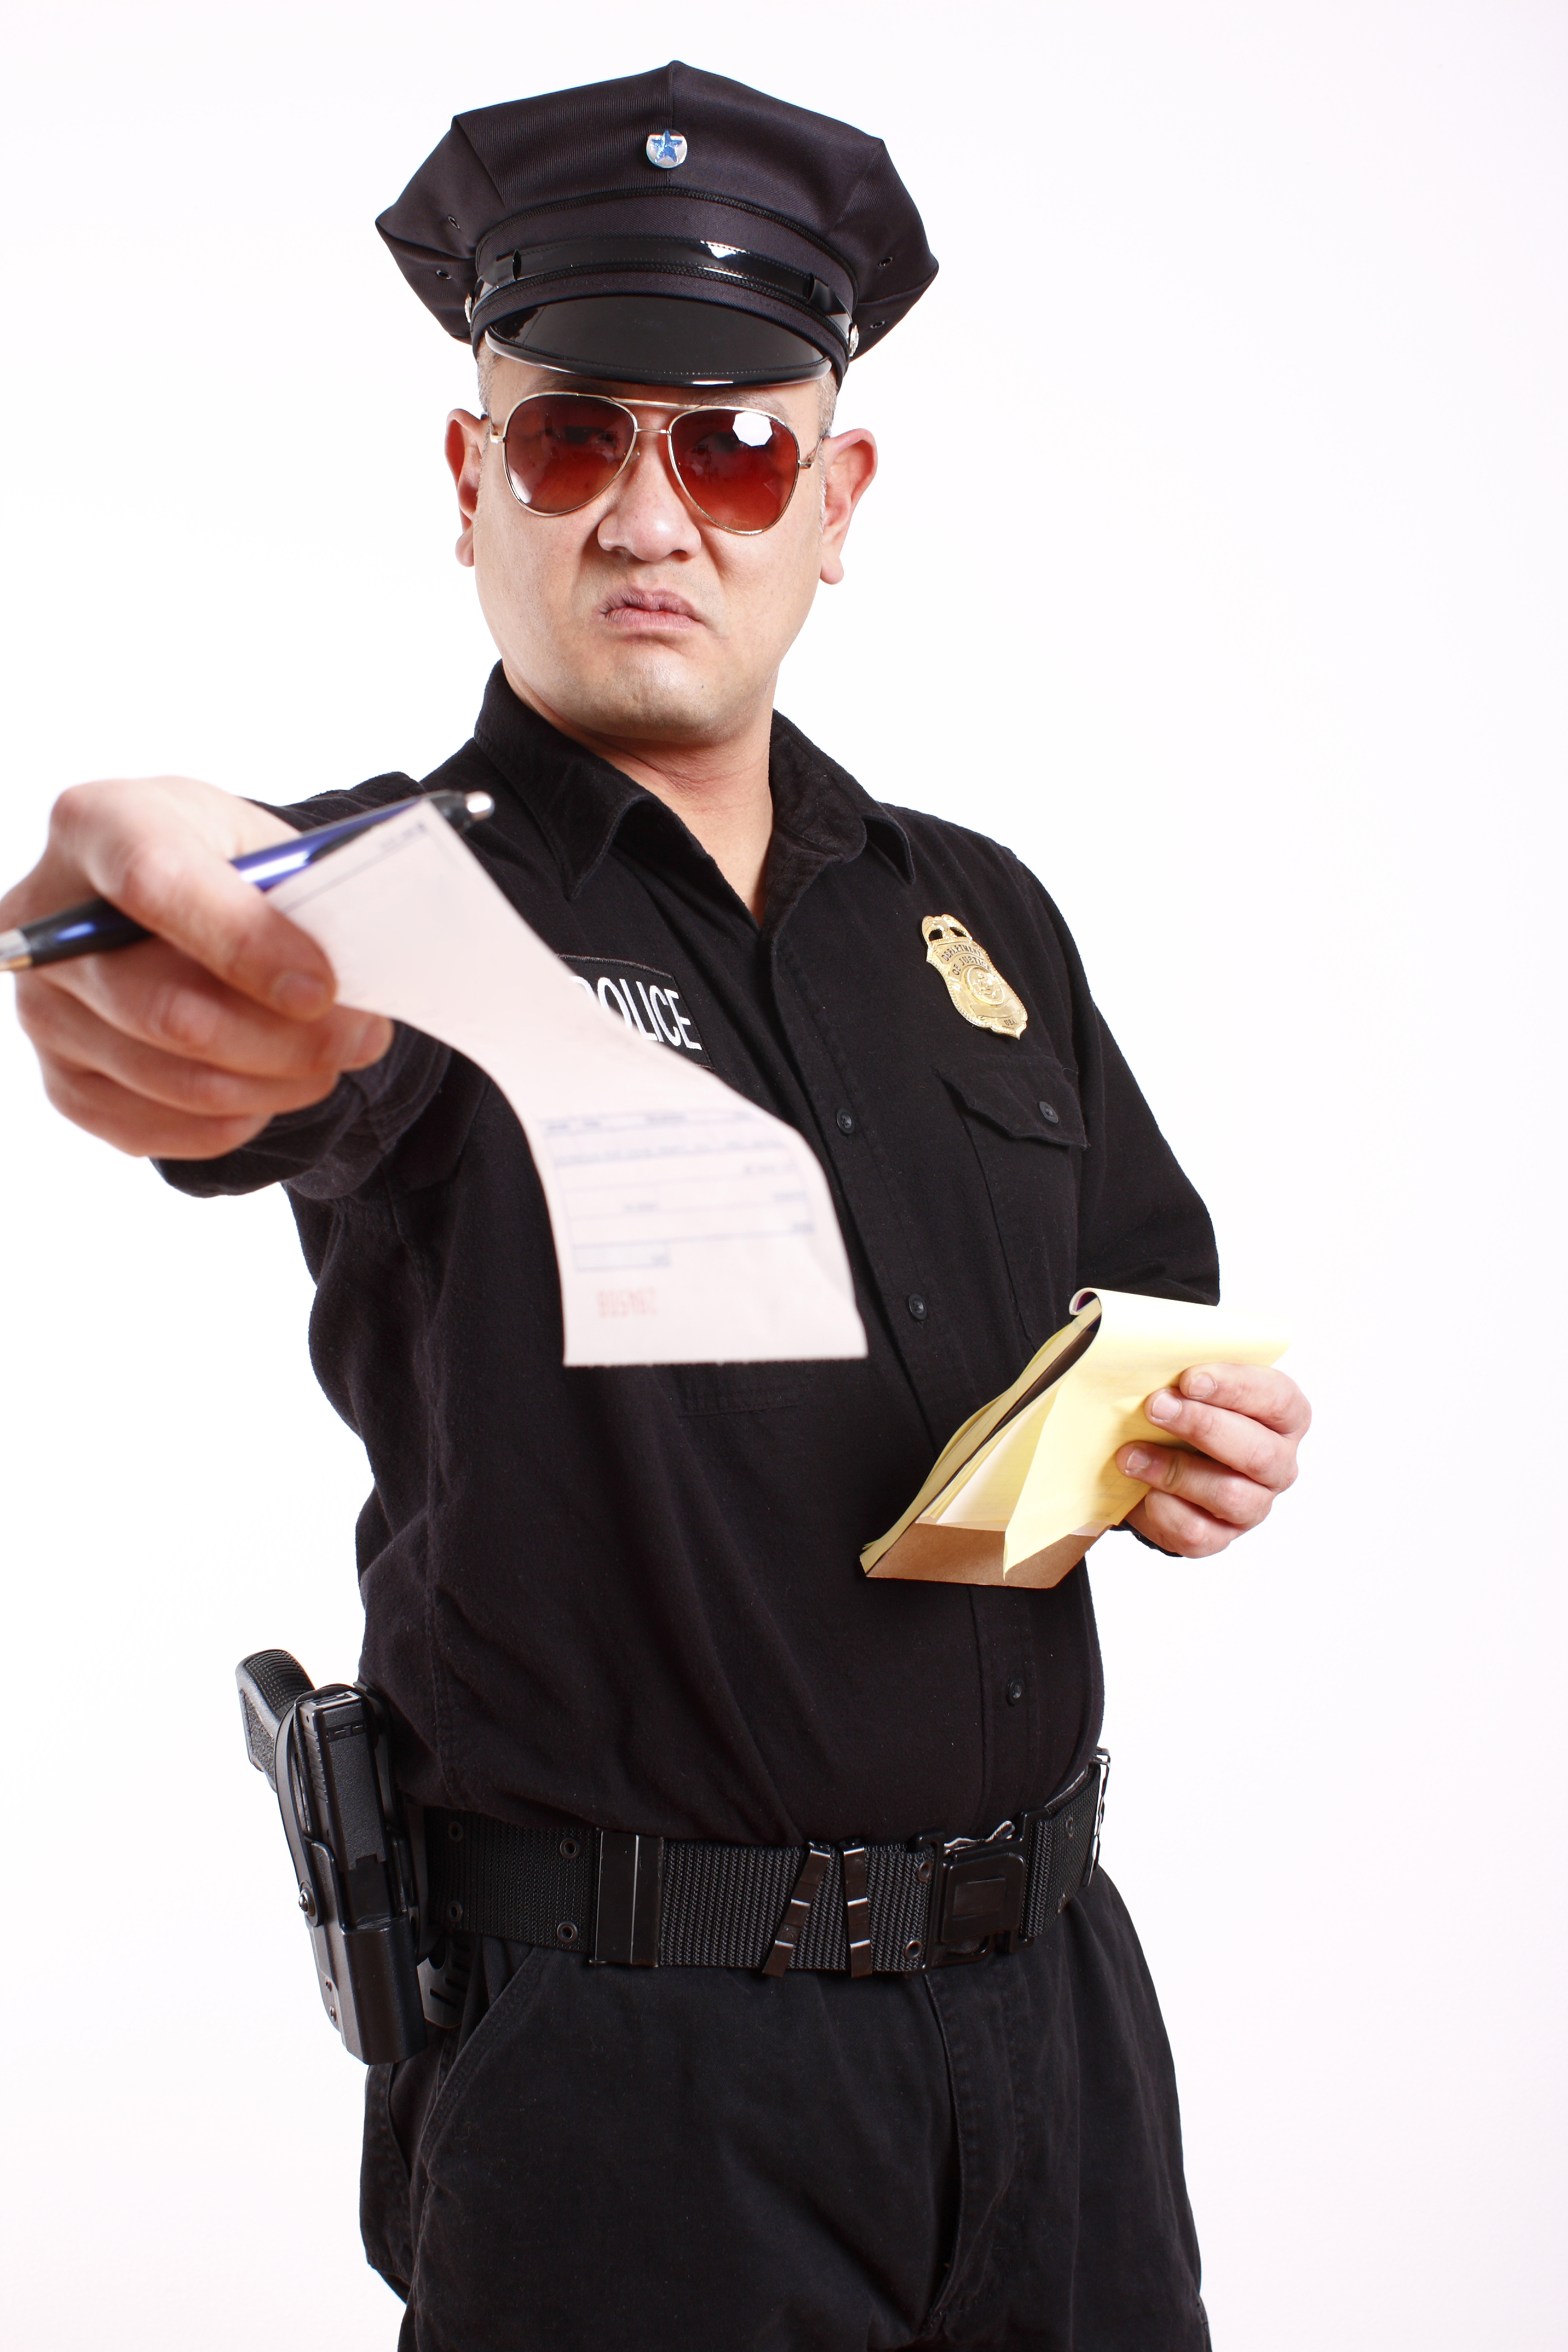 A police officer with a ticket. | Source: Shutterstock